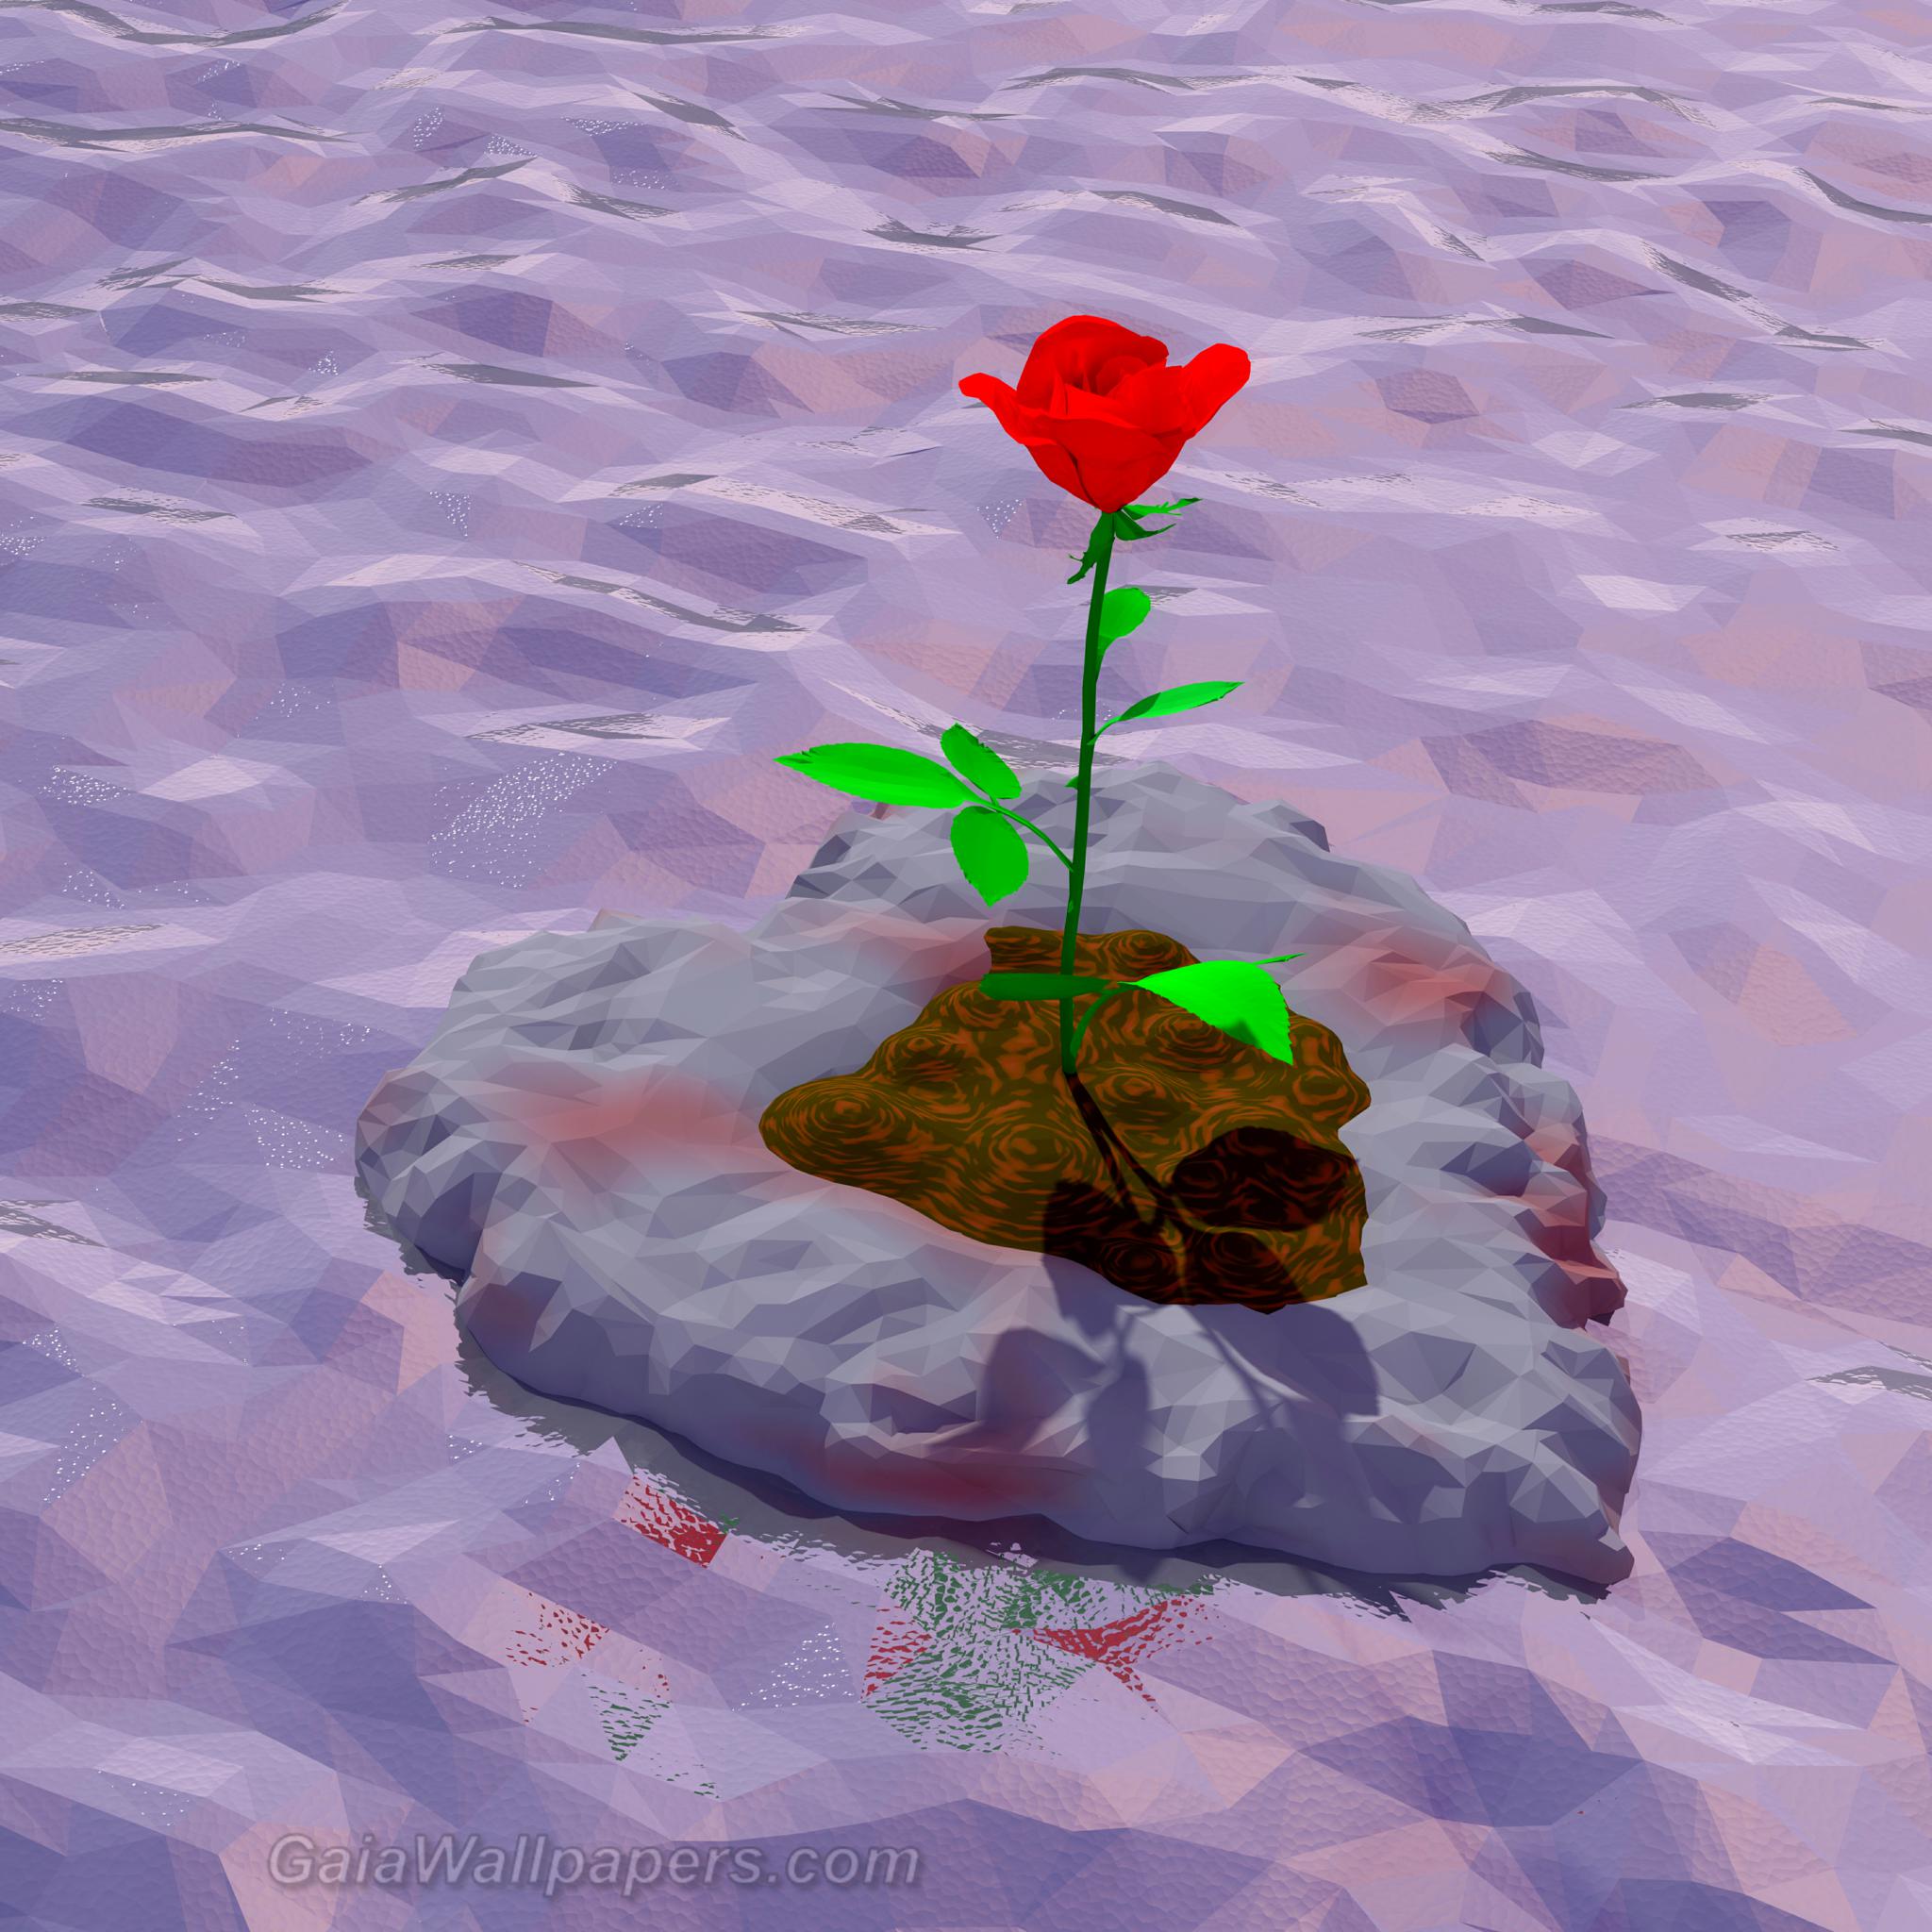 Rose of love drifting on the sea - Free desktop wallpapers